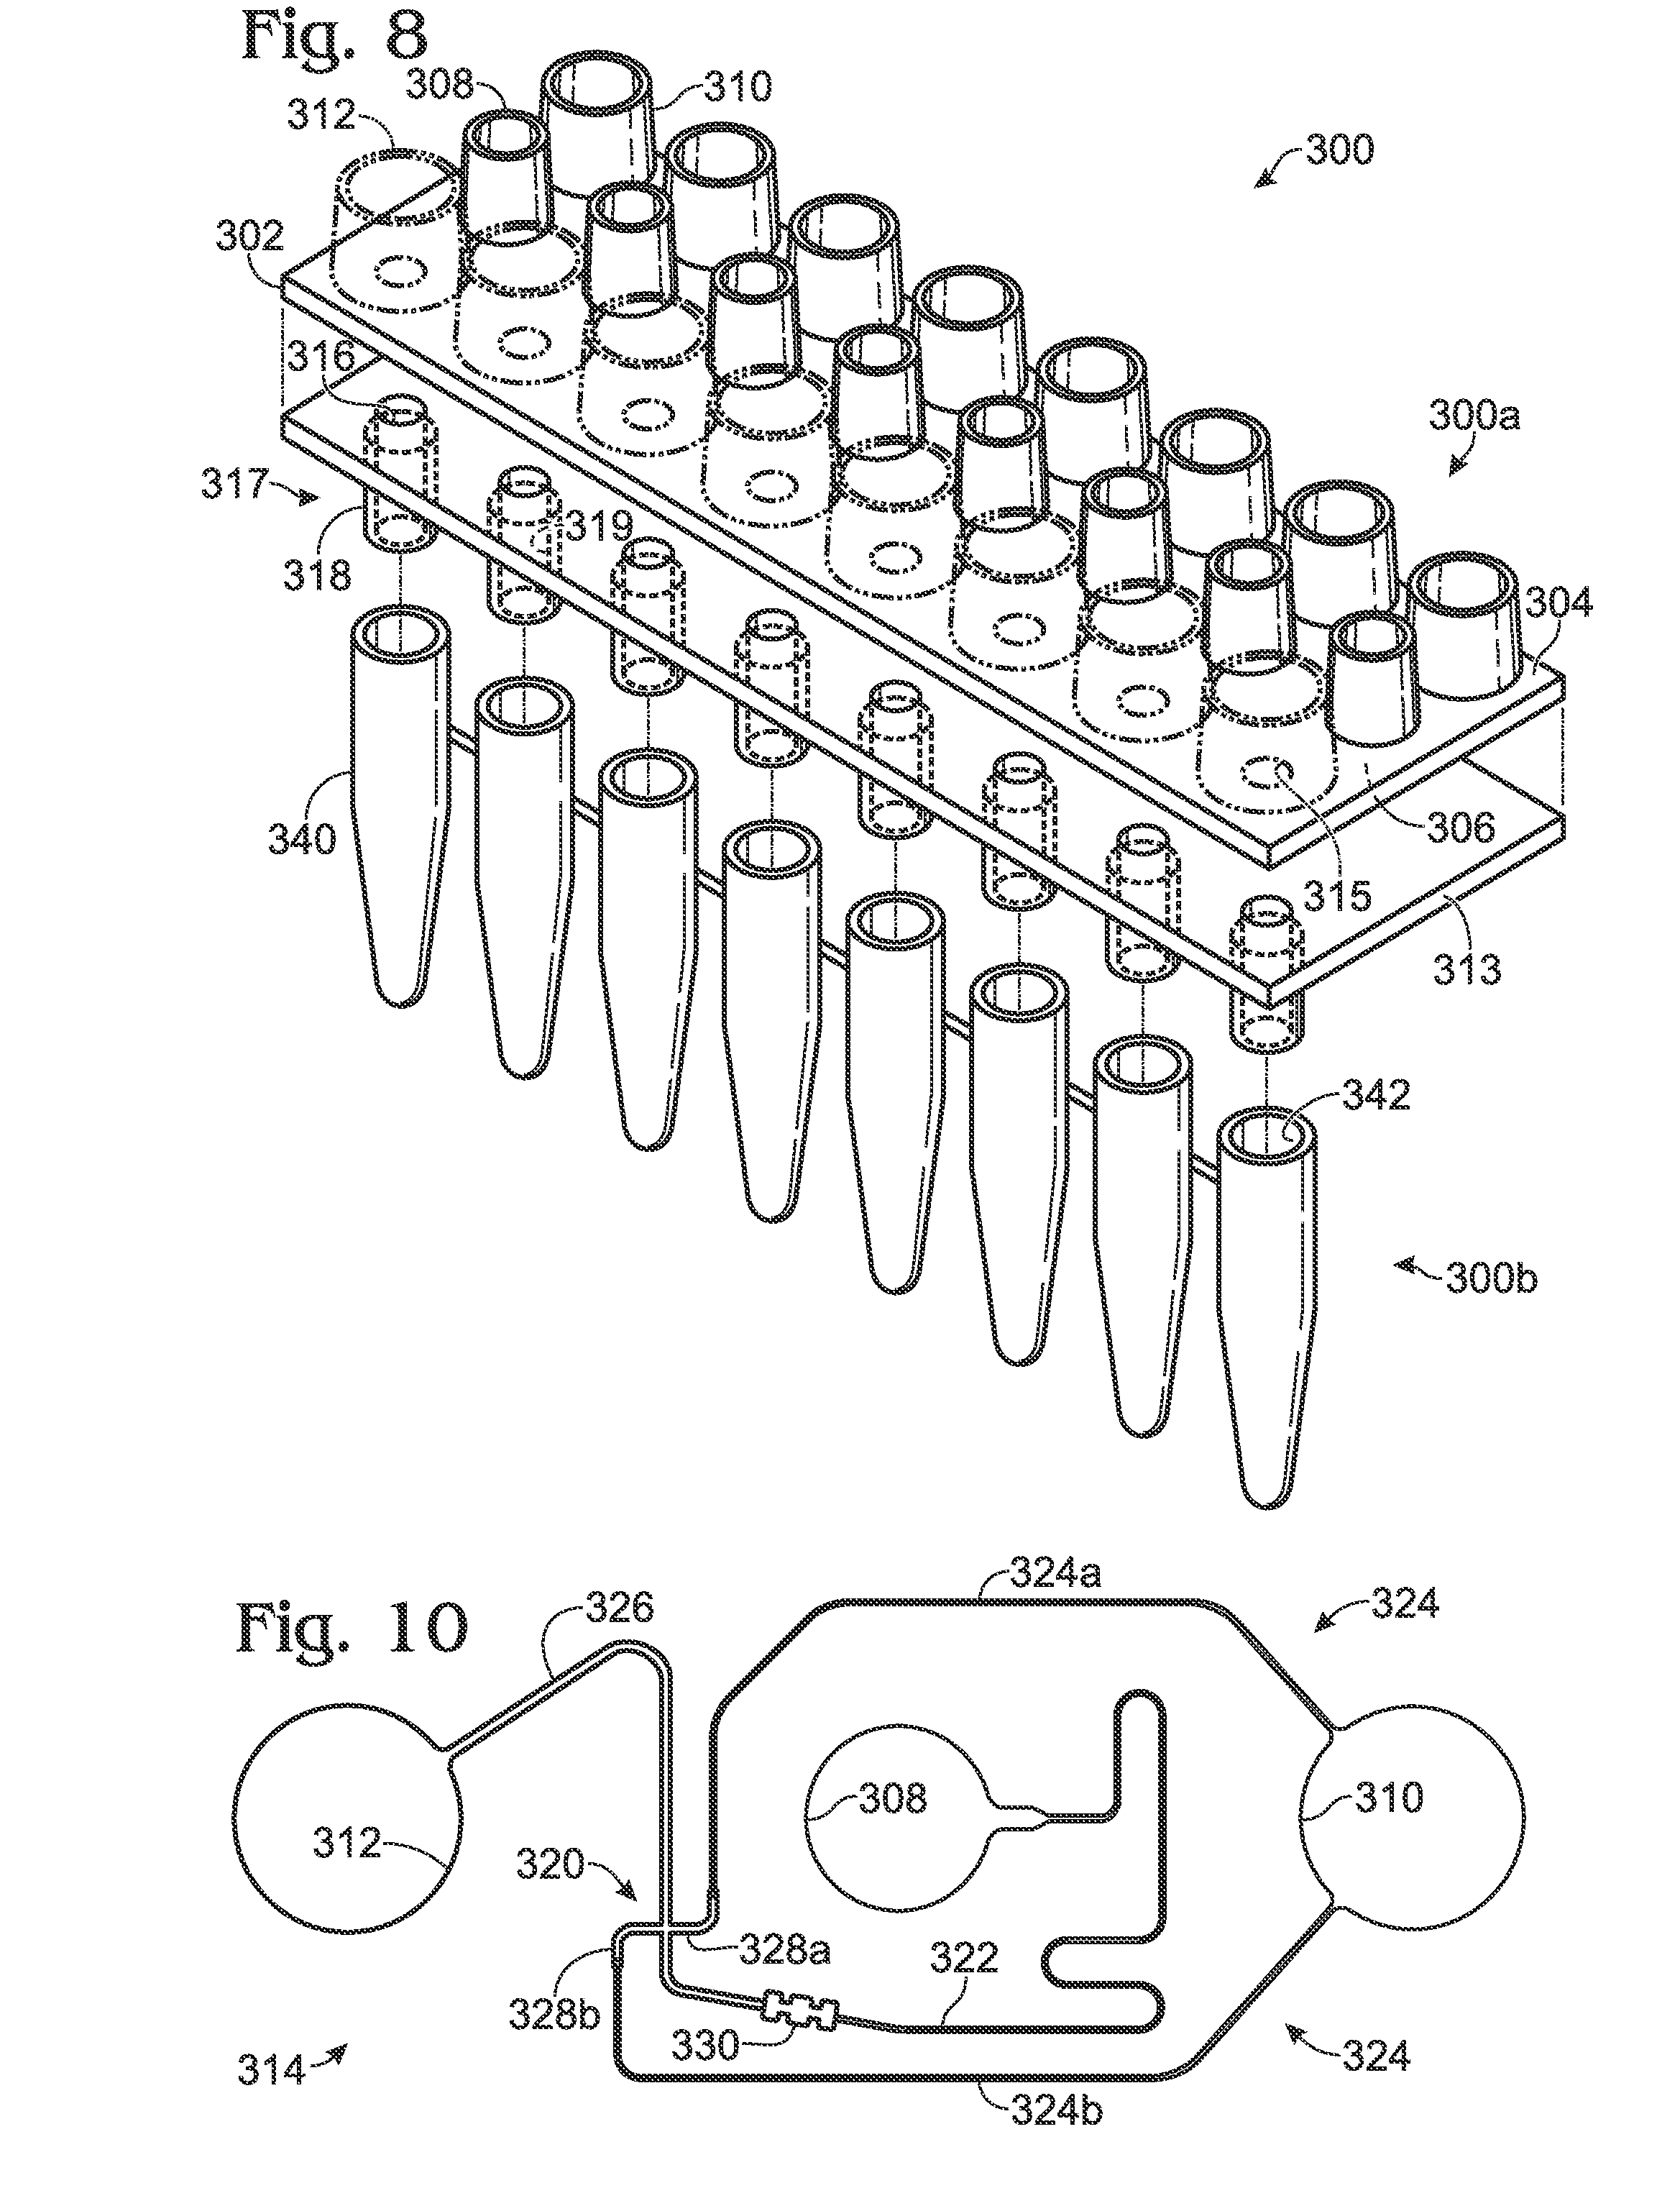 Droplet generator with collection tube